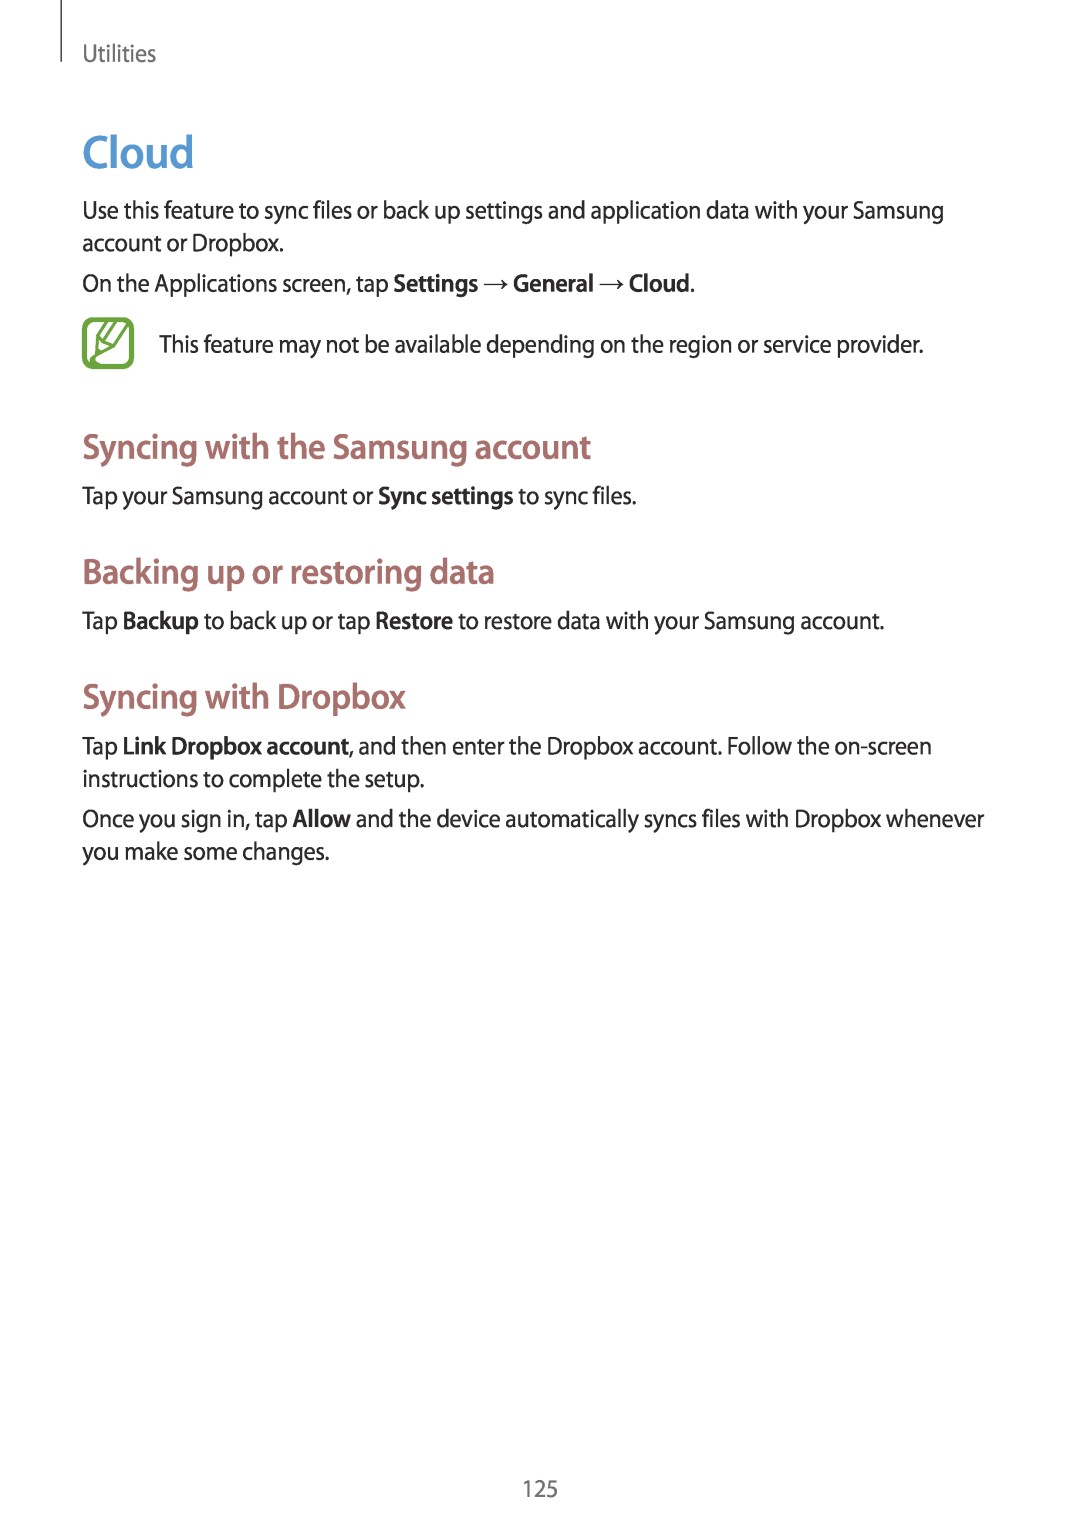 Samsung SM-N9005ZKEAFR manual Cloud, Syncing with the Samsung account, Backing up or restoring data, Syncing with Dropbox 